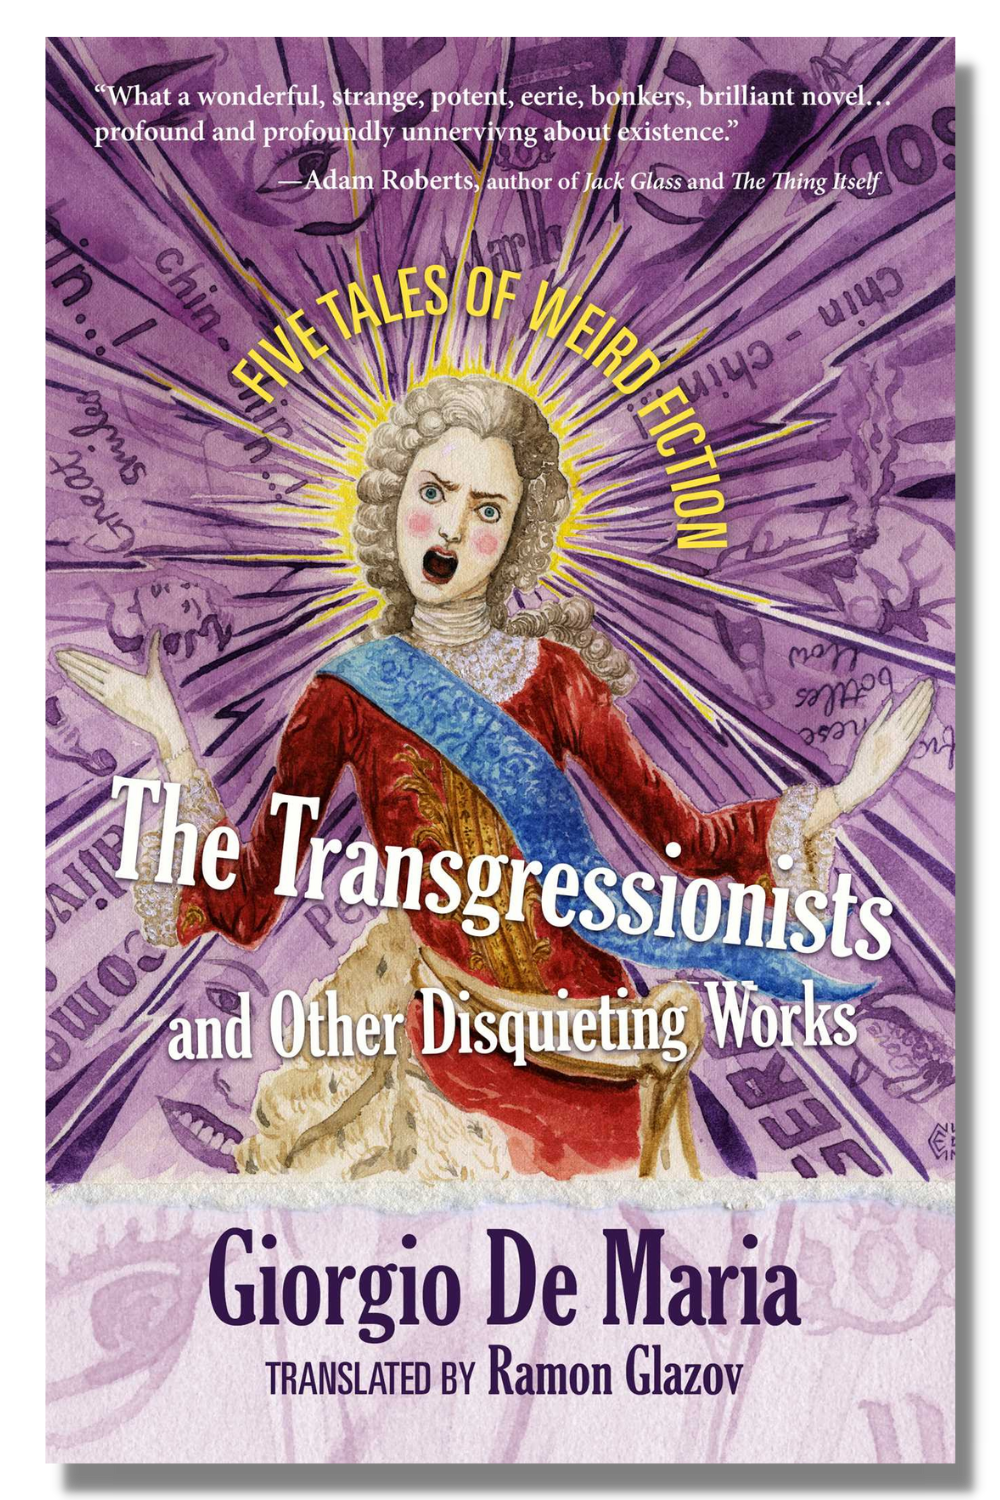 The cover of "The Transgressionists"